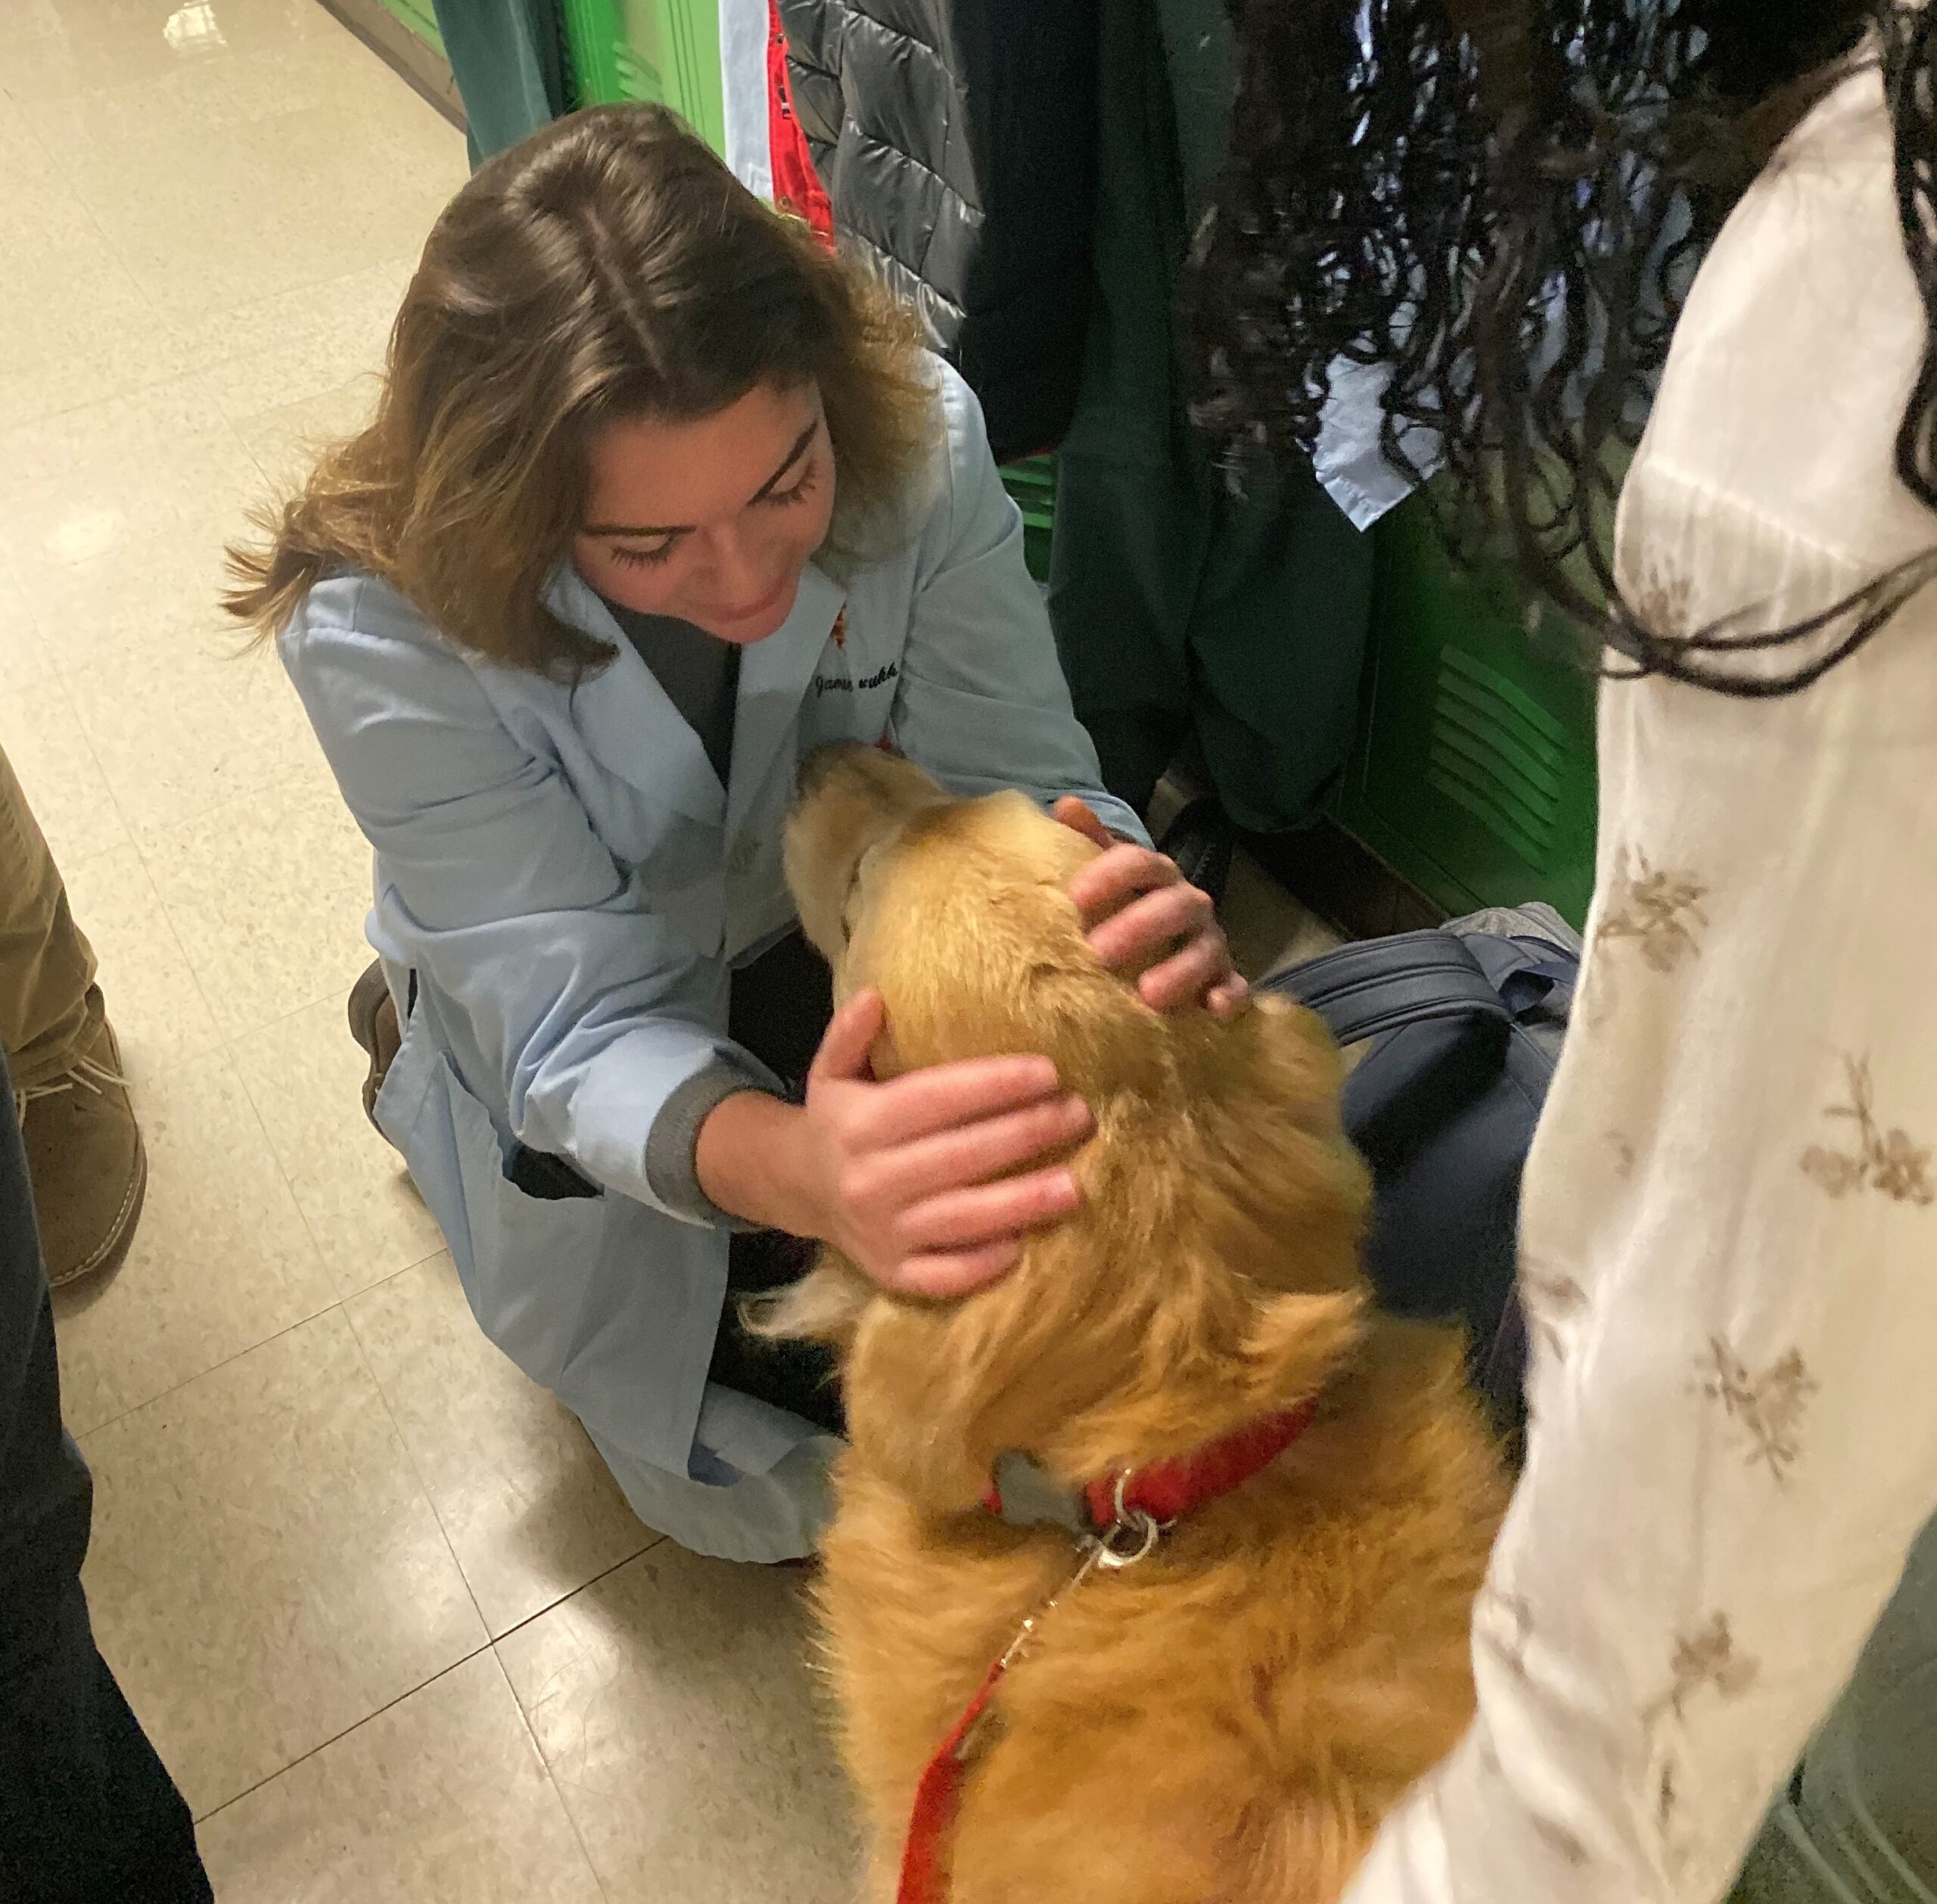 Scout greets veterinary students in the hallway